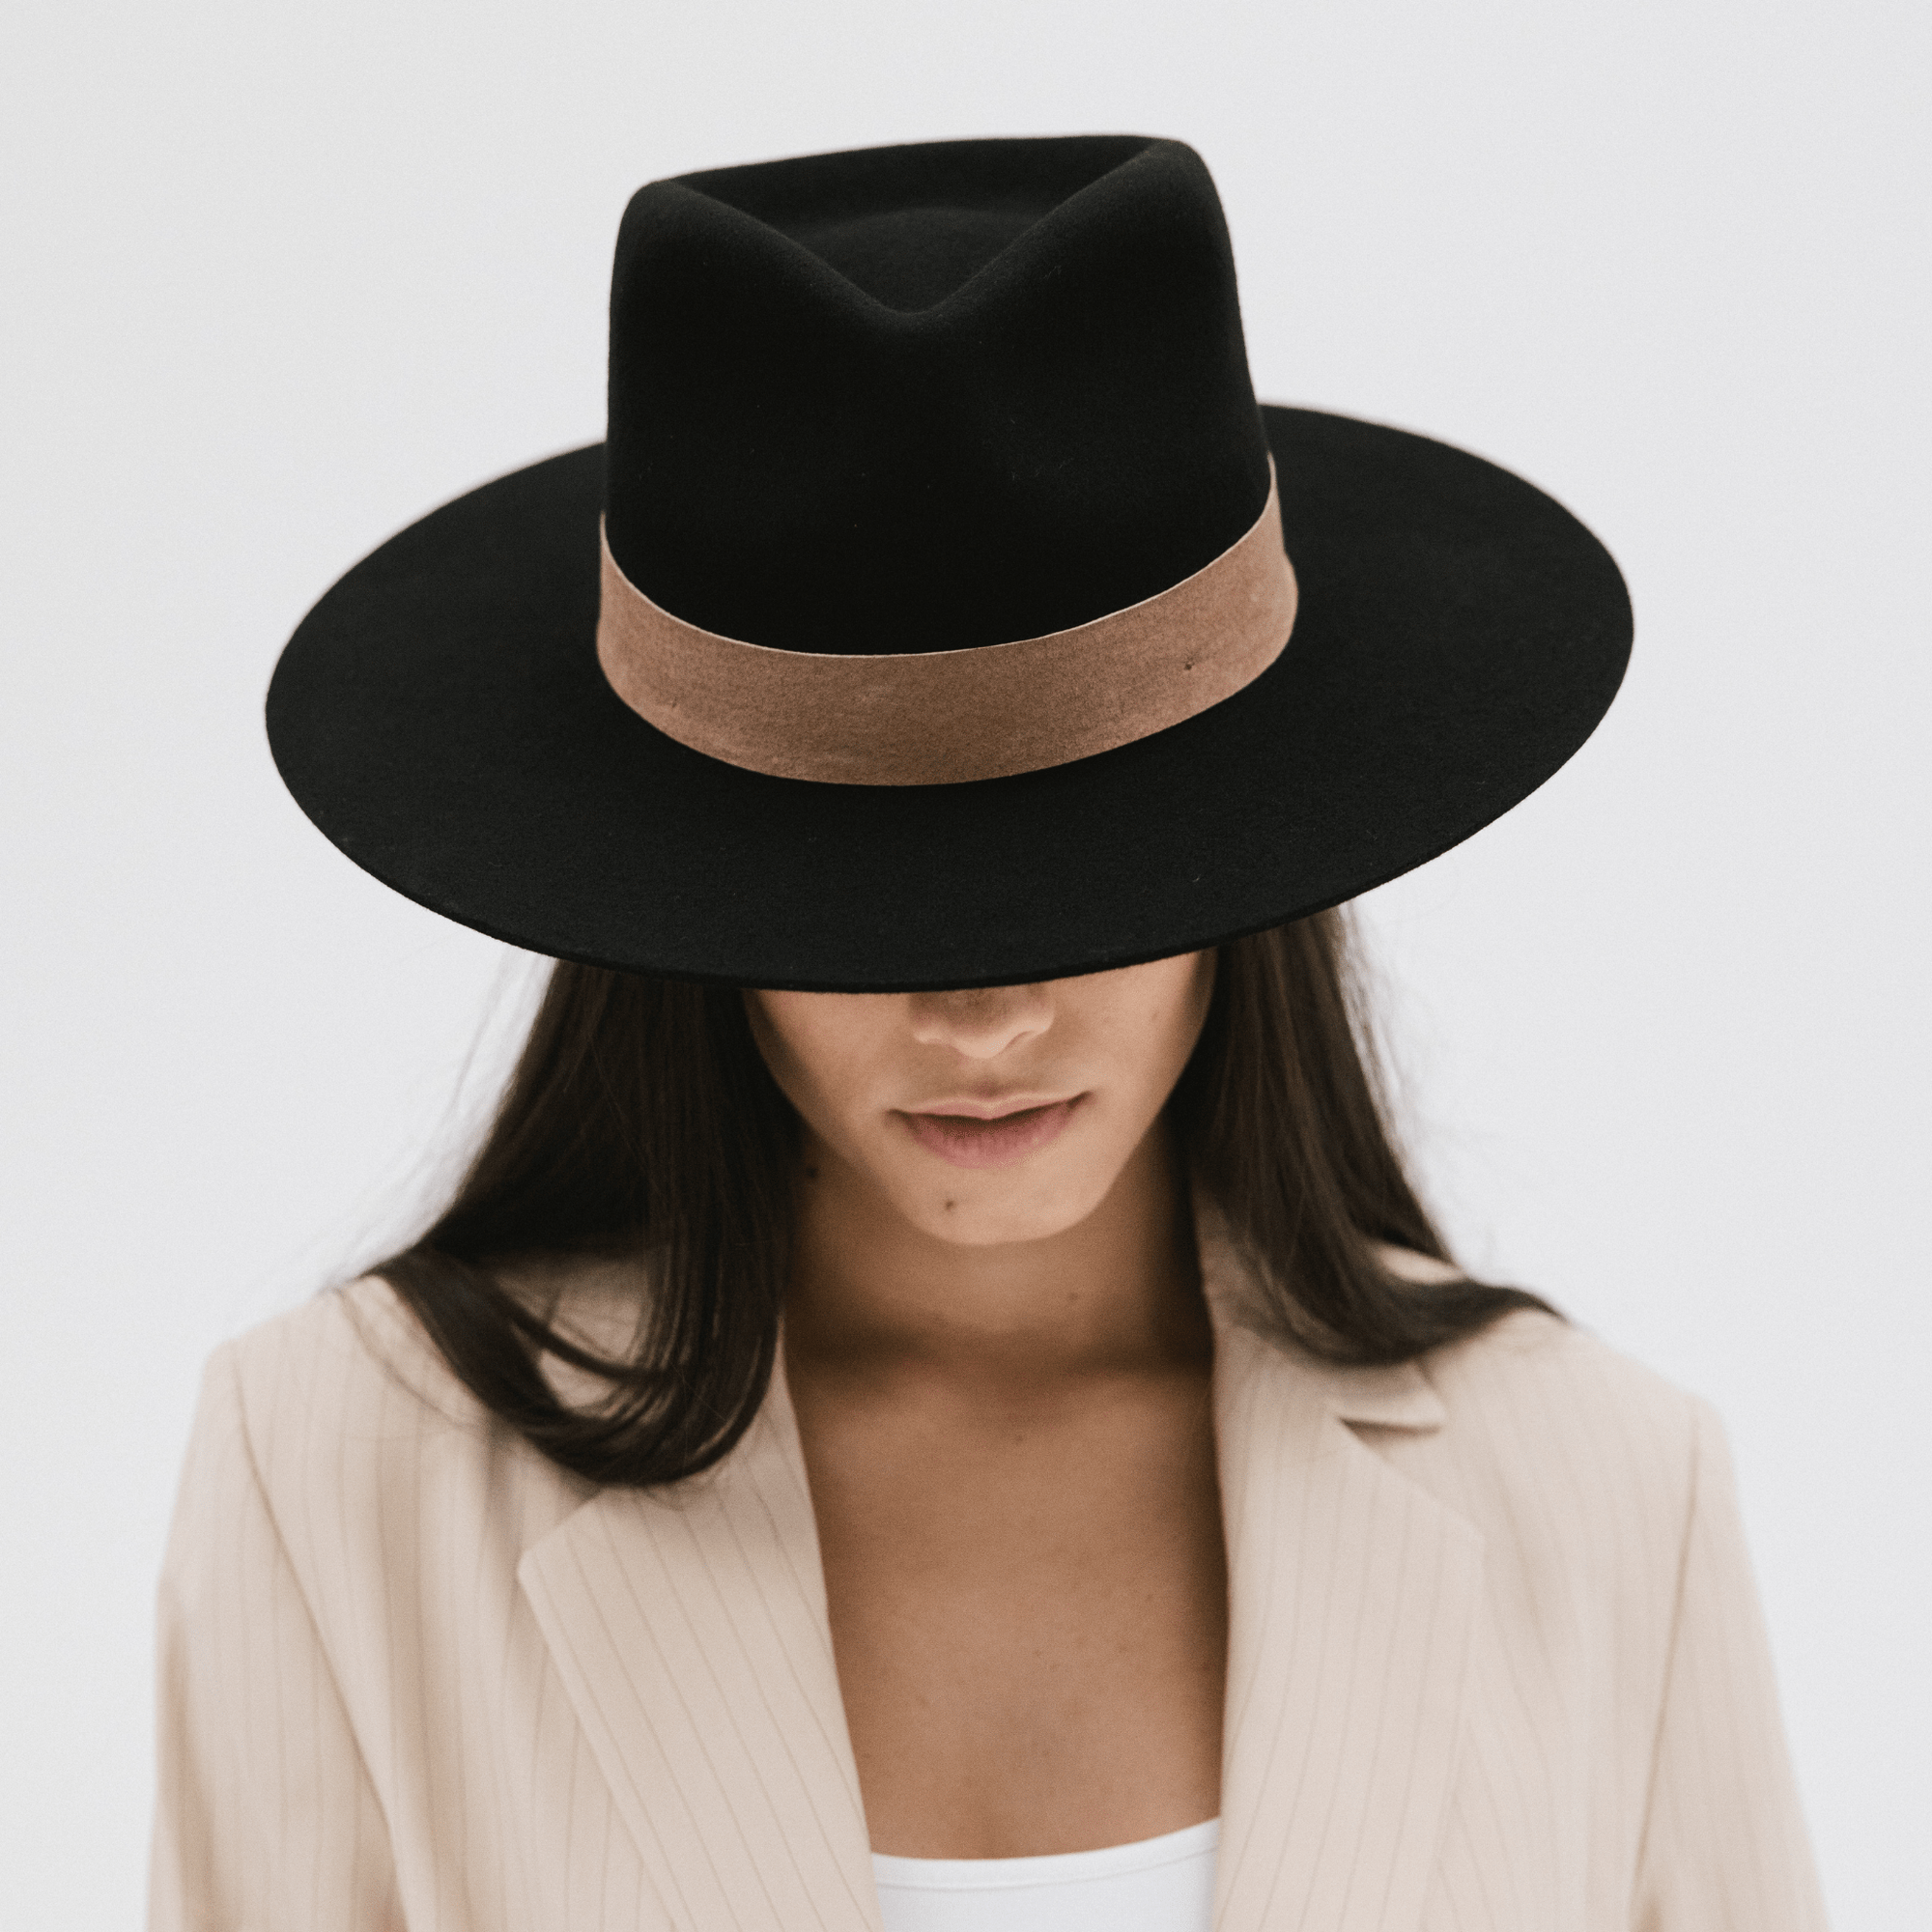 Gigi Pip felt hats for women - Miller Fedora - teardrop fedora with tall front crown and a structured flat brim [ivory]